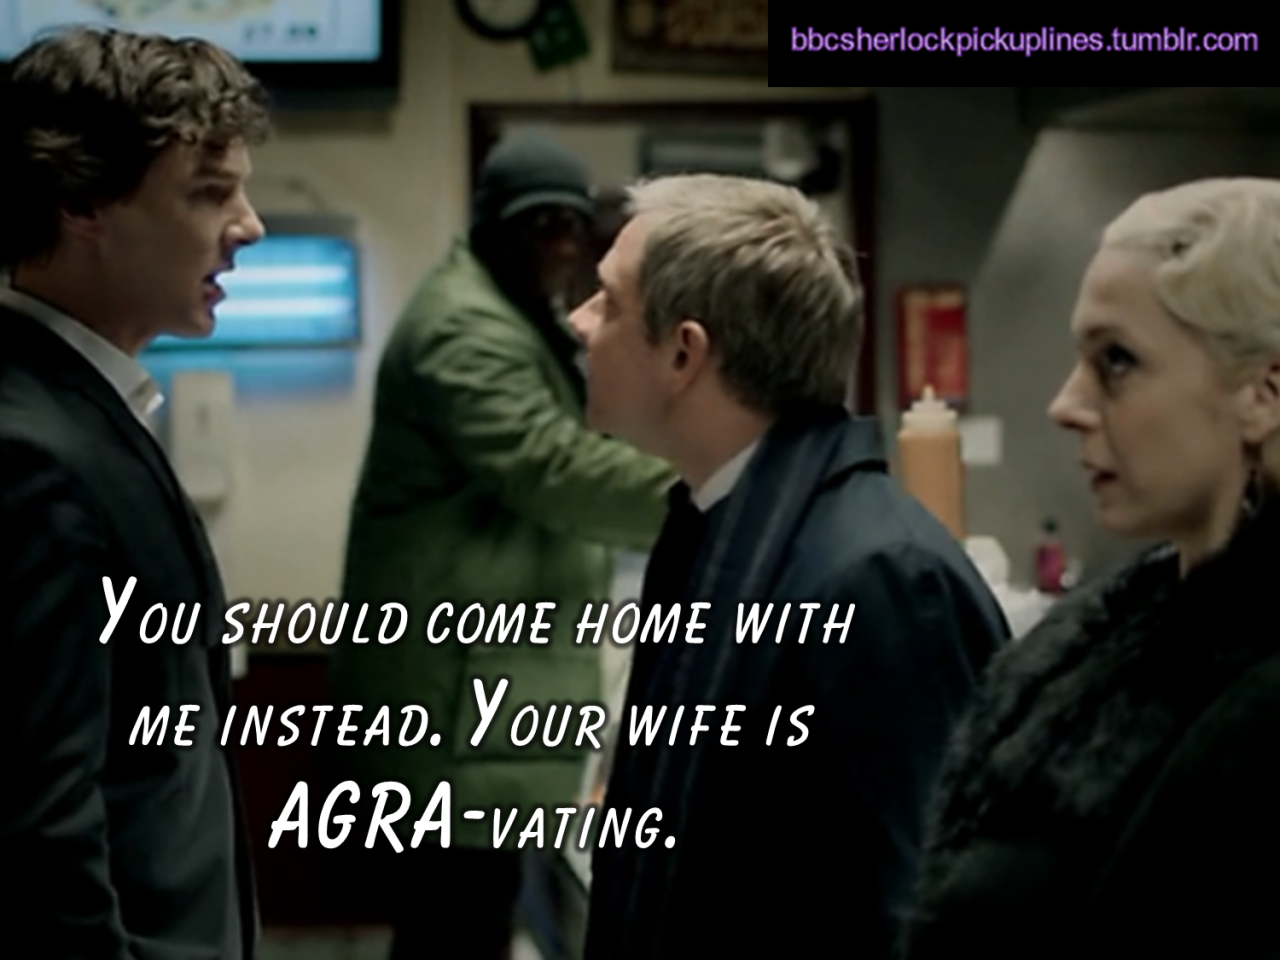 bbcsherlockpickuplines:“You should come home with me instead. Your wife is AGRA-vating.”